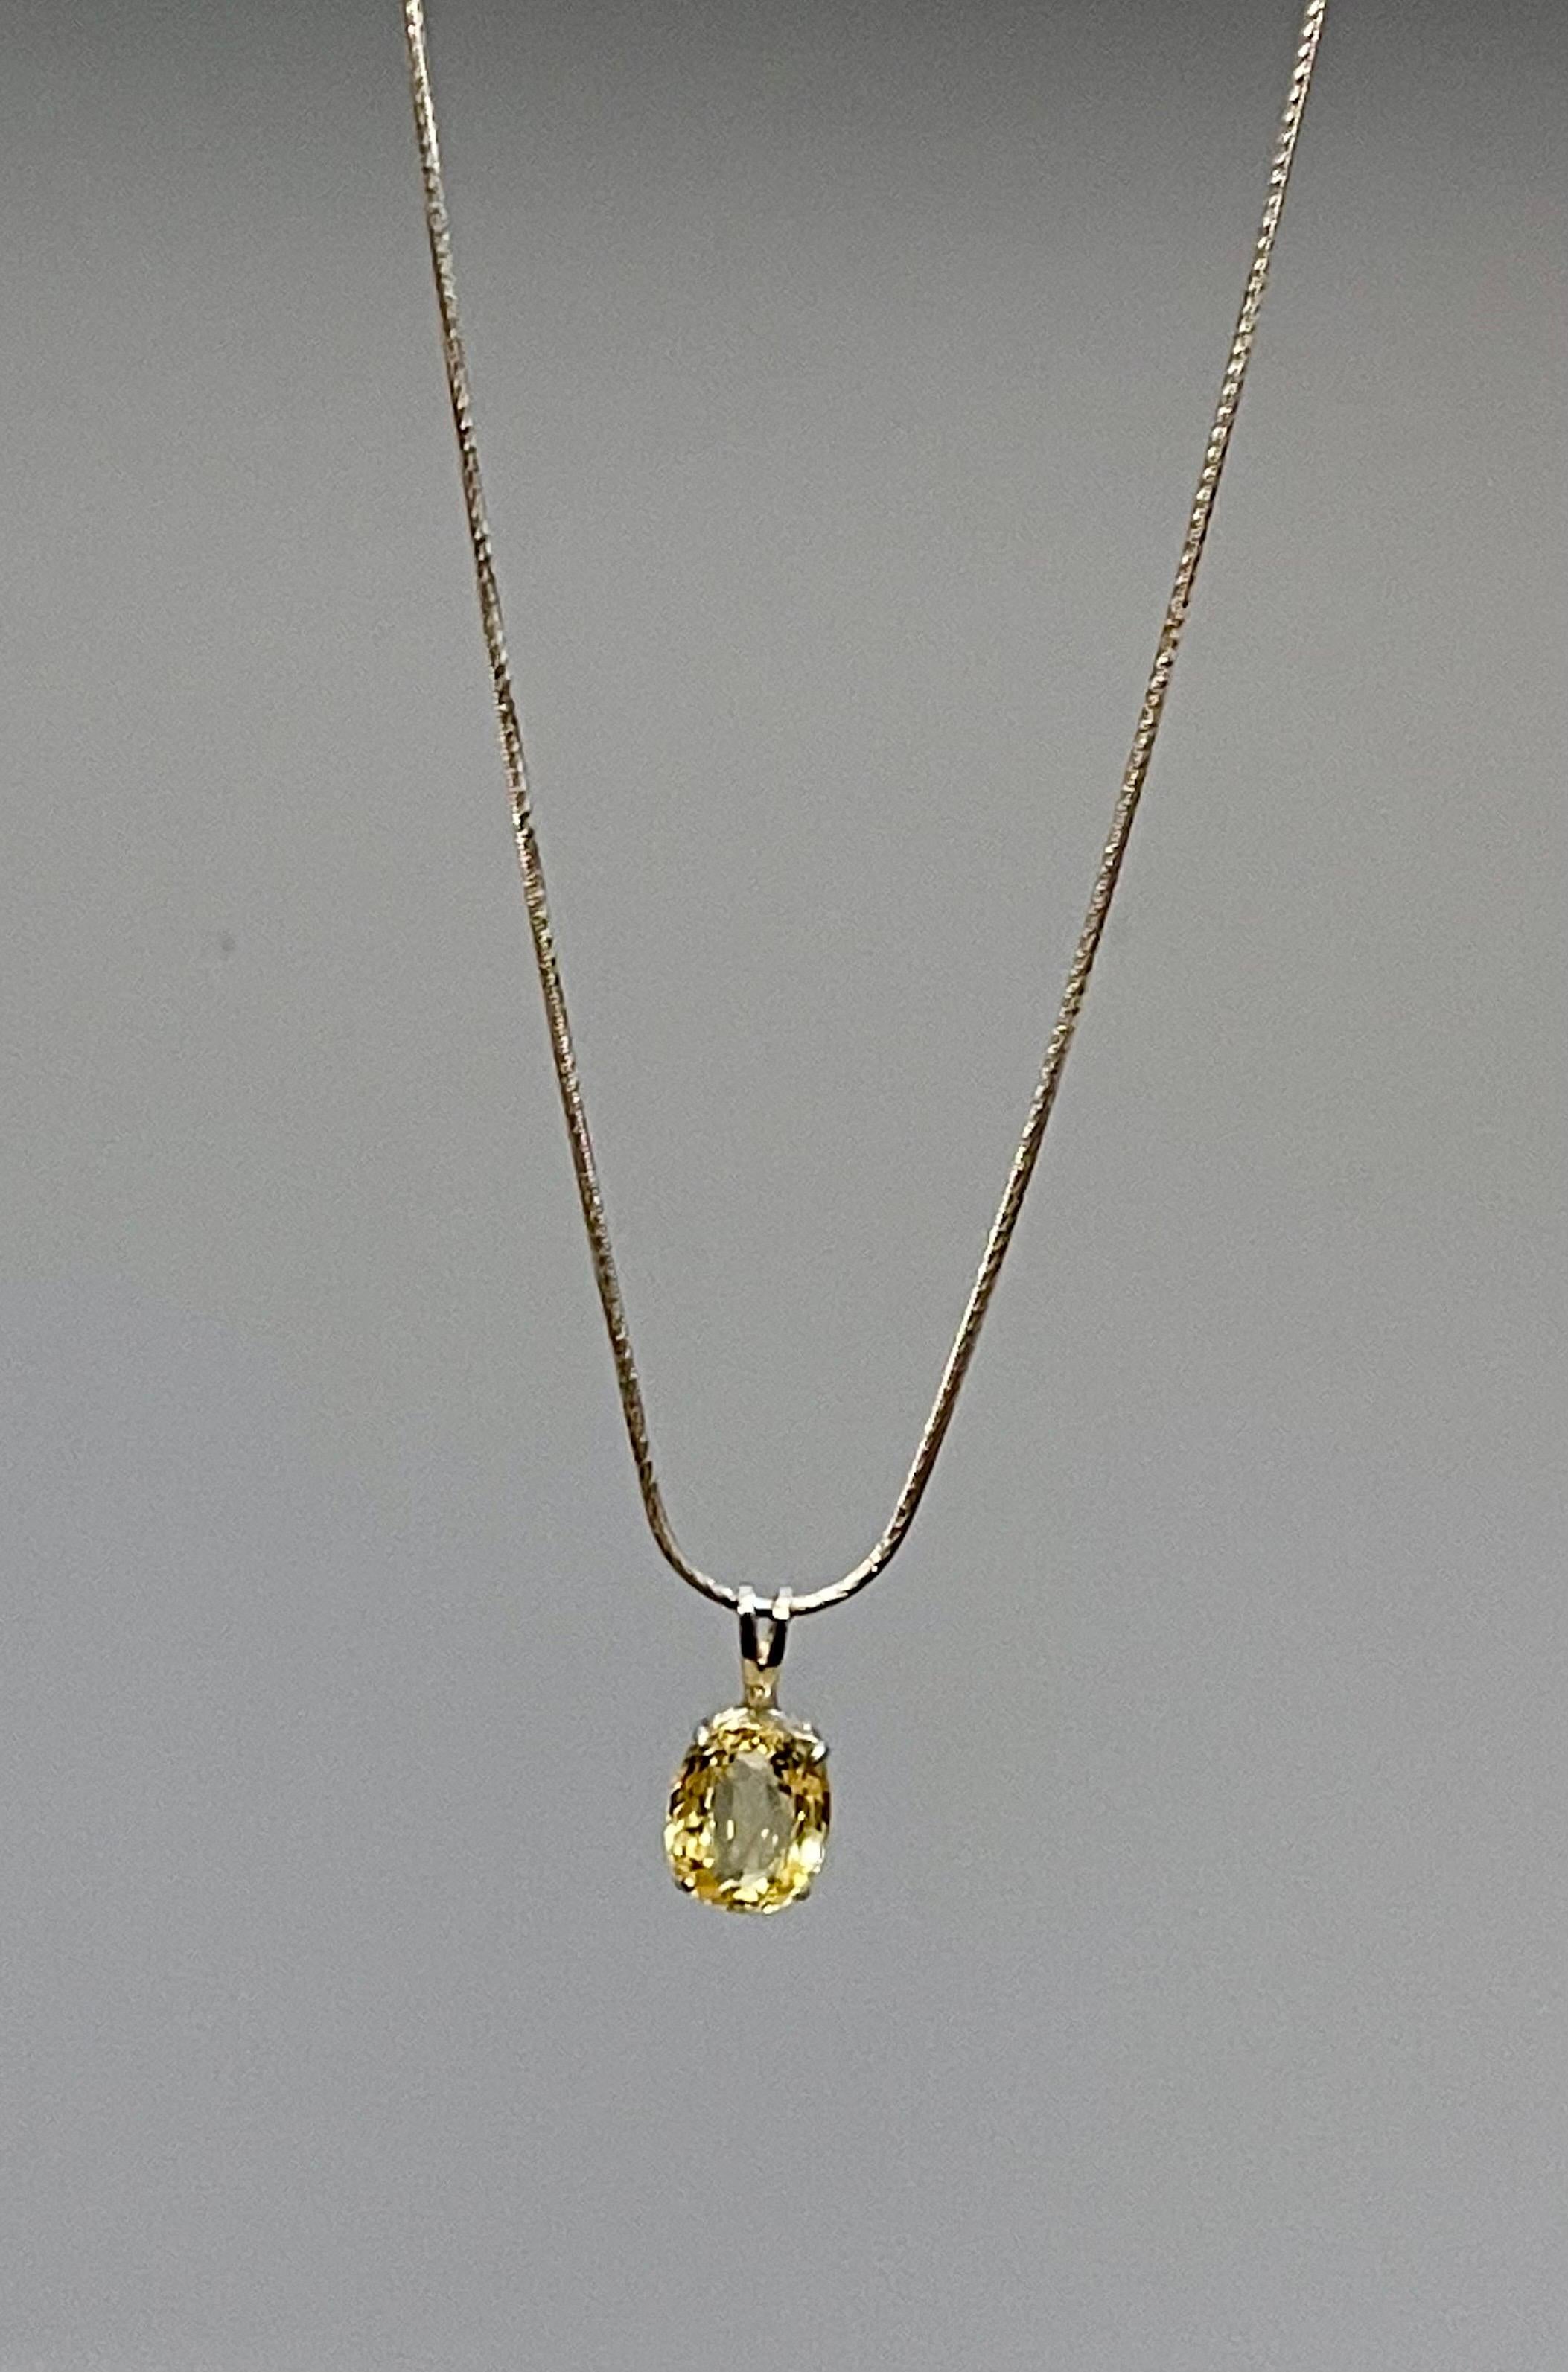 This Yellow Sapphire has Two certificates 
ne from GIA 
One from Continental Gemological Laborartory Canada Limited
GIA Certified 5.56 Ct Natural Ceylon Yellow Sapphire Pendant Necklace white Gold
Oval shape
Yellow sapphire 
Natural Corundum, Heated